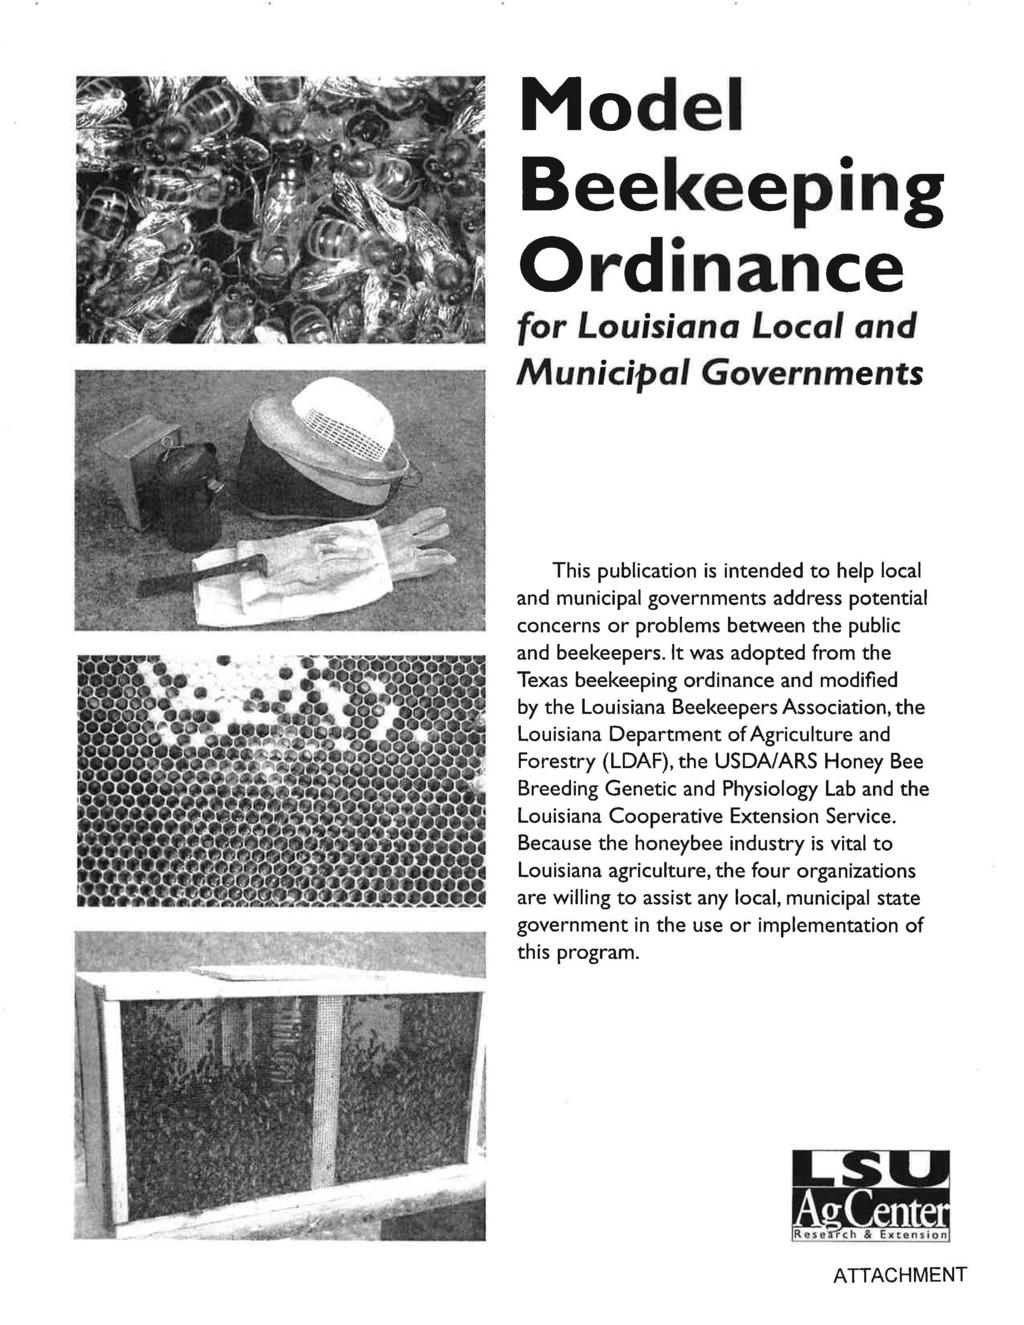 Model Beekeeping Ordinance for Louisiana Local and Municipal Governments This publication is intended to help local and municipal governments address potential concerns or problems between the public